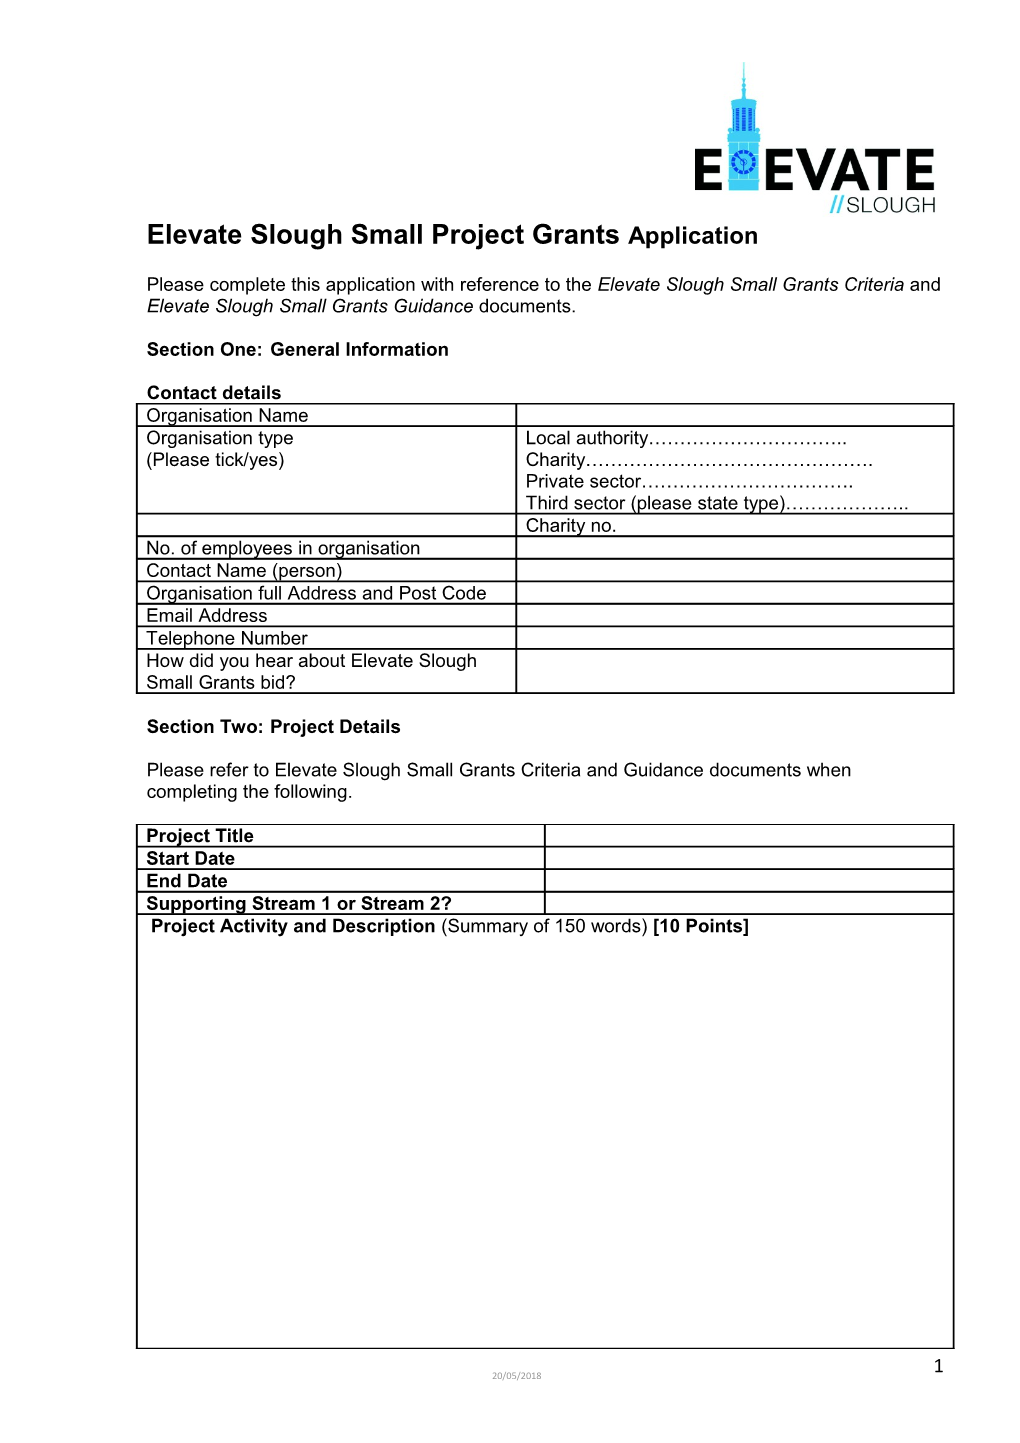 Elevate Slough Small Project Grants Application